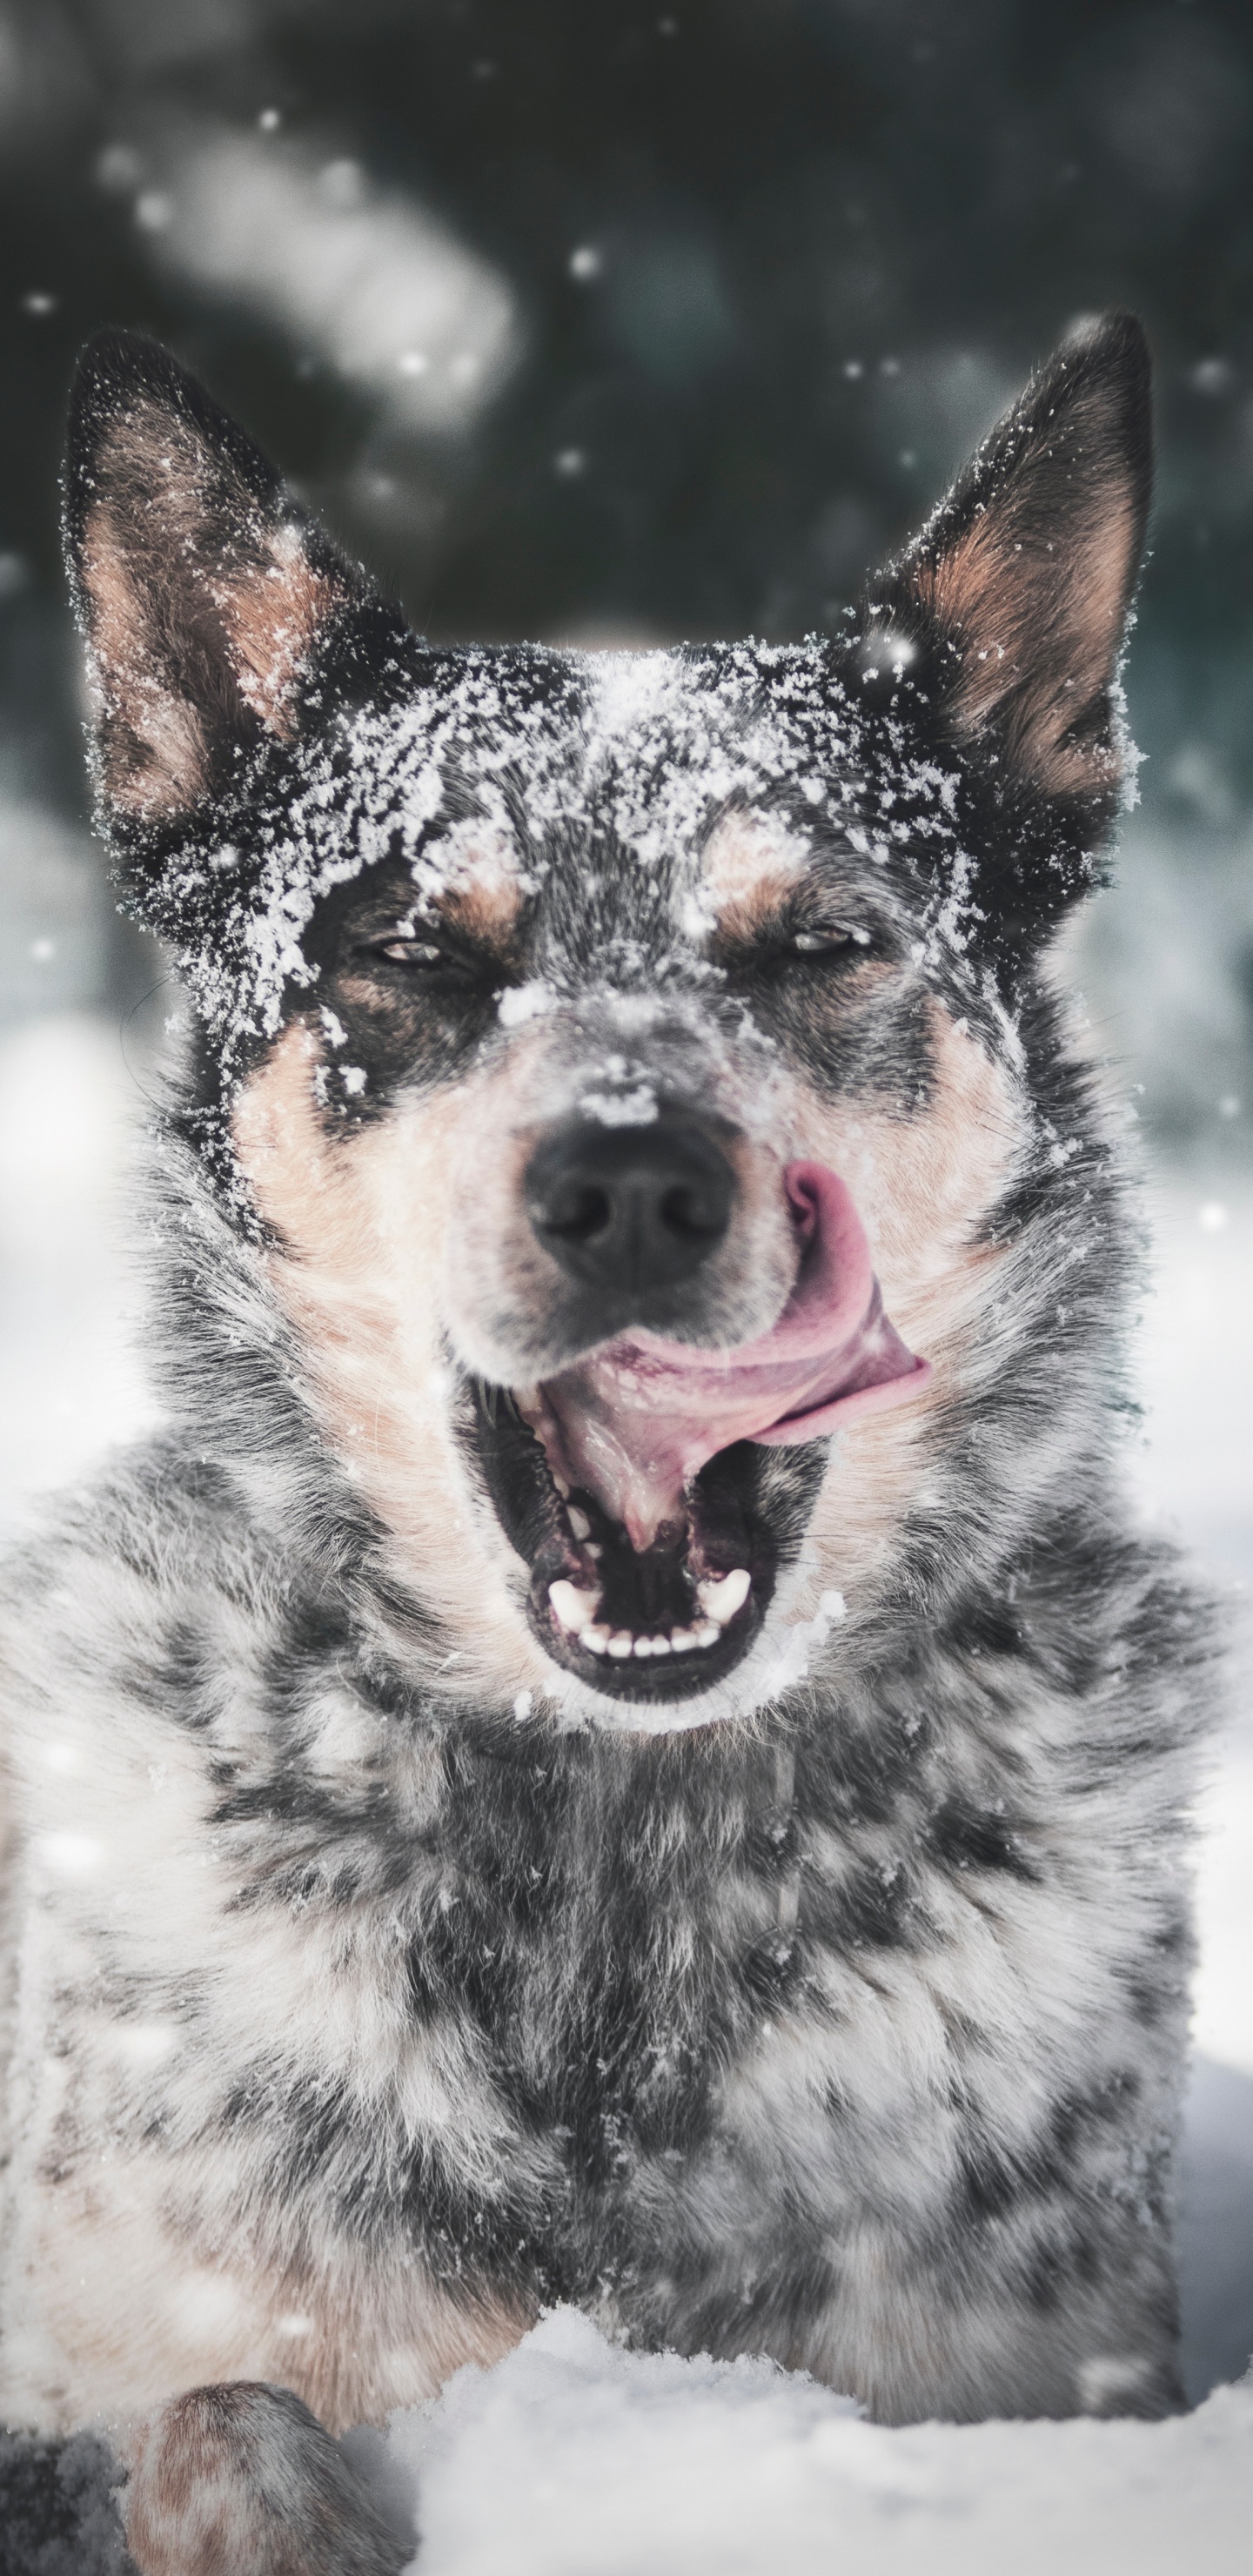 Black and White Short Coated Dog on Snow Covered Ground During Daytime. Wallpaper in 1440x2960 Resolution